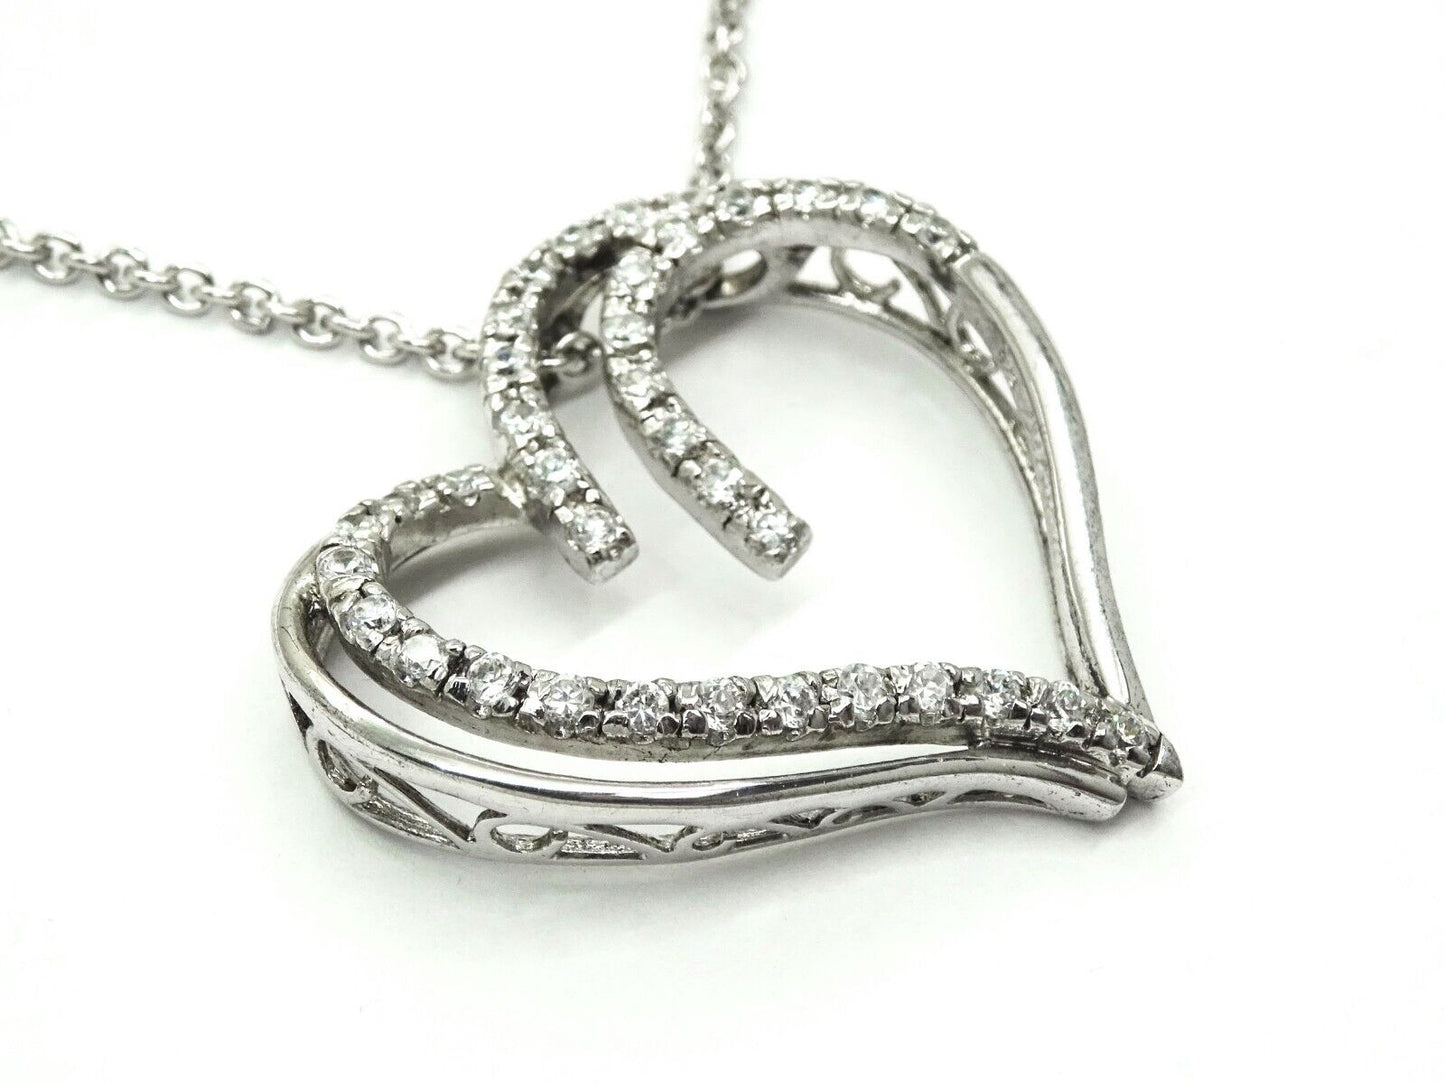 Big Open Heart CZ Pendant Chain Necklace Sterling Silver